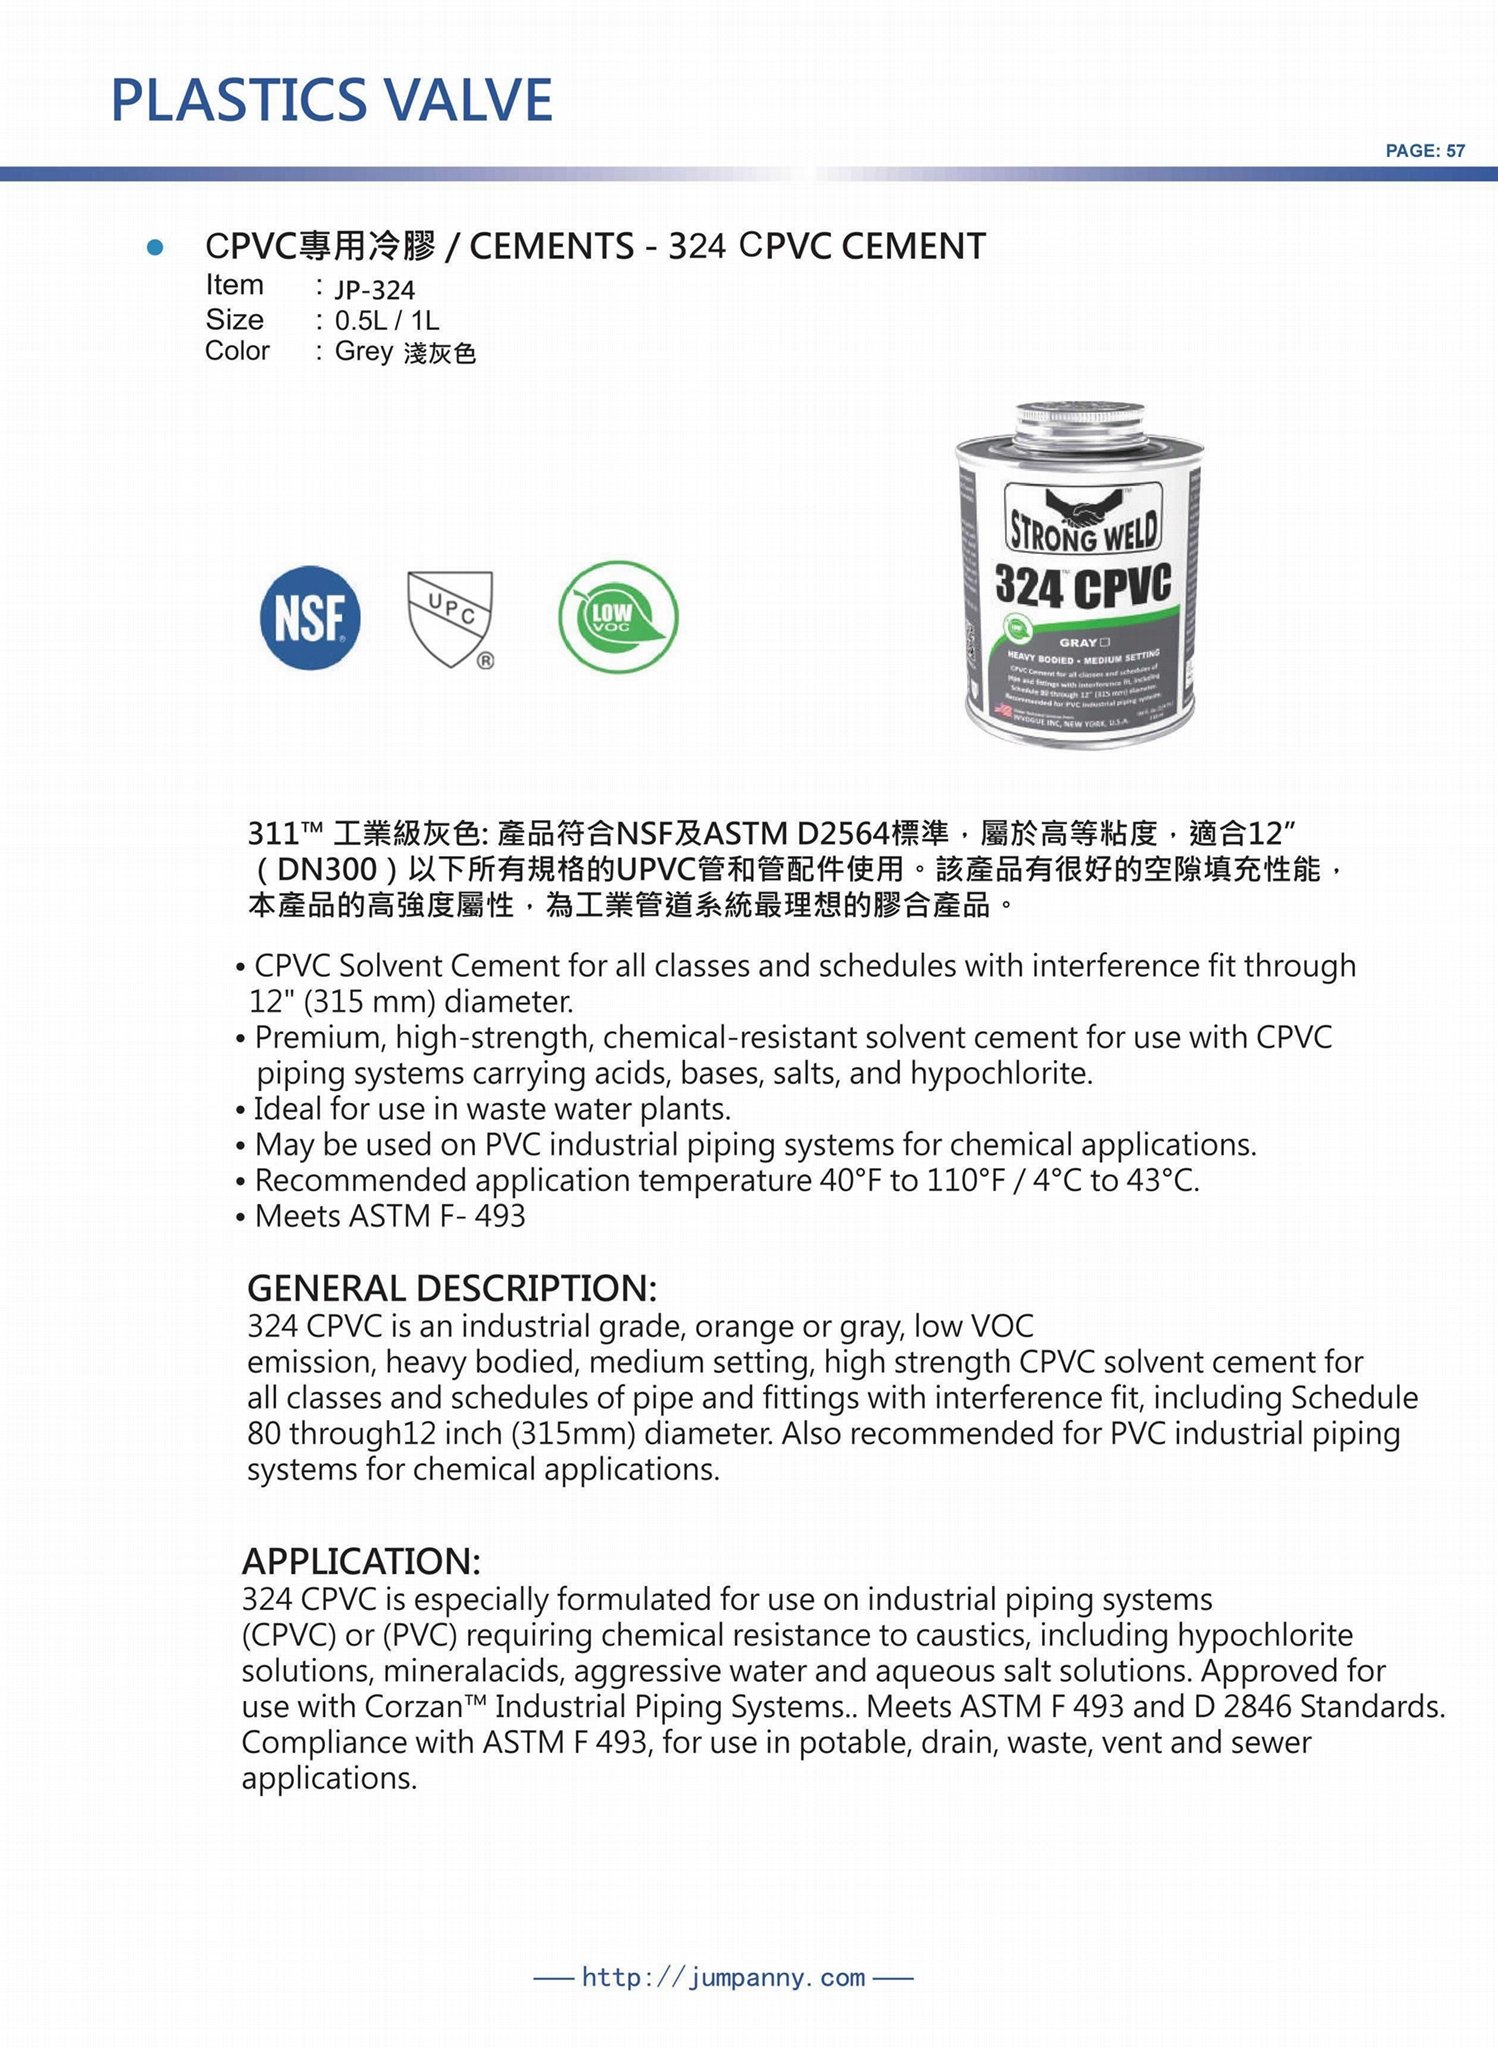 CPVC GRAY SOLVENT CEMENT 2